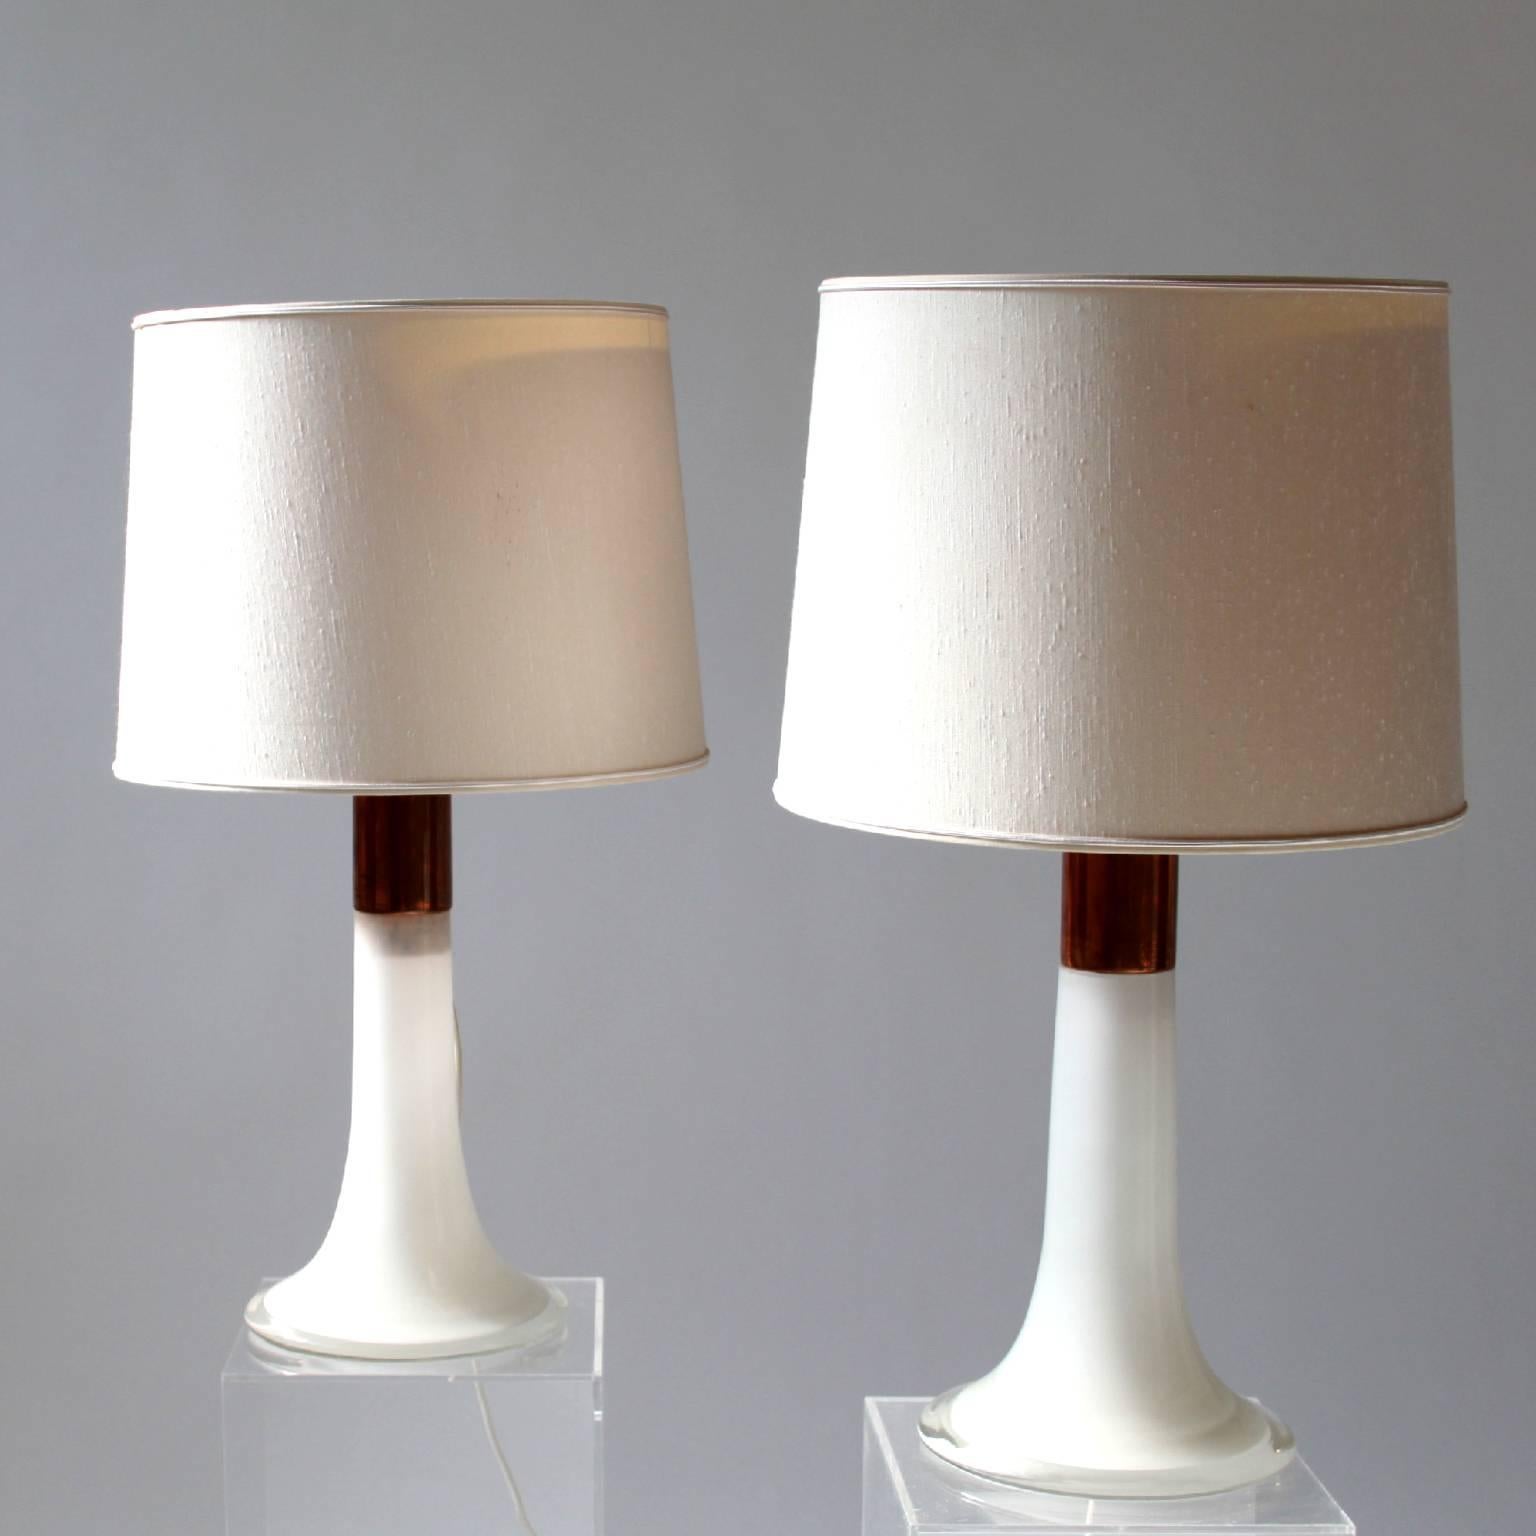 20th Century Lisa Johansson-Pape, Pair of Opal Glass and Copper Table Lamps, 1960s